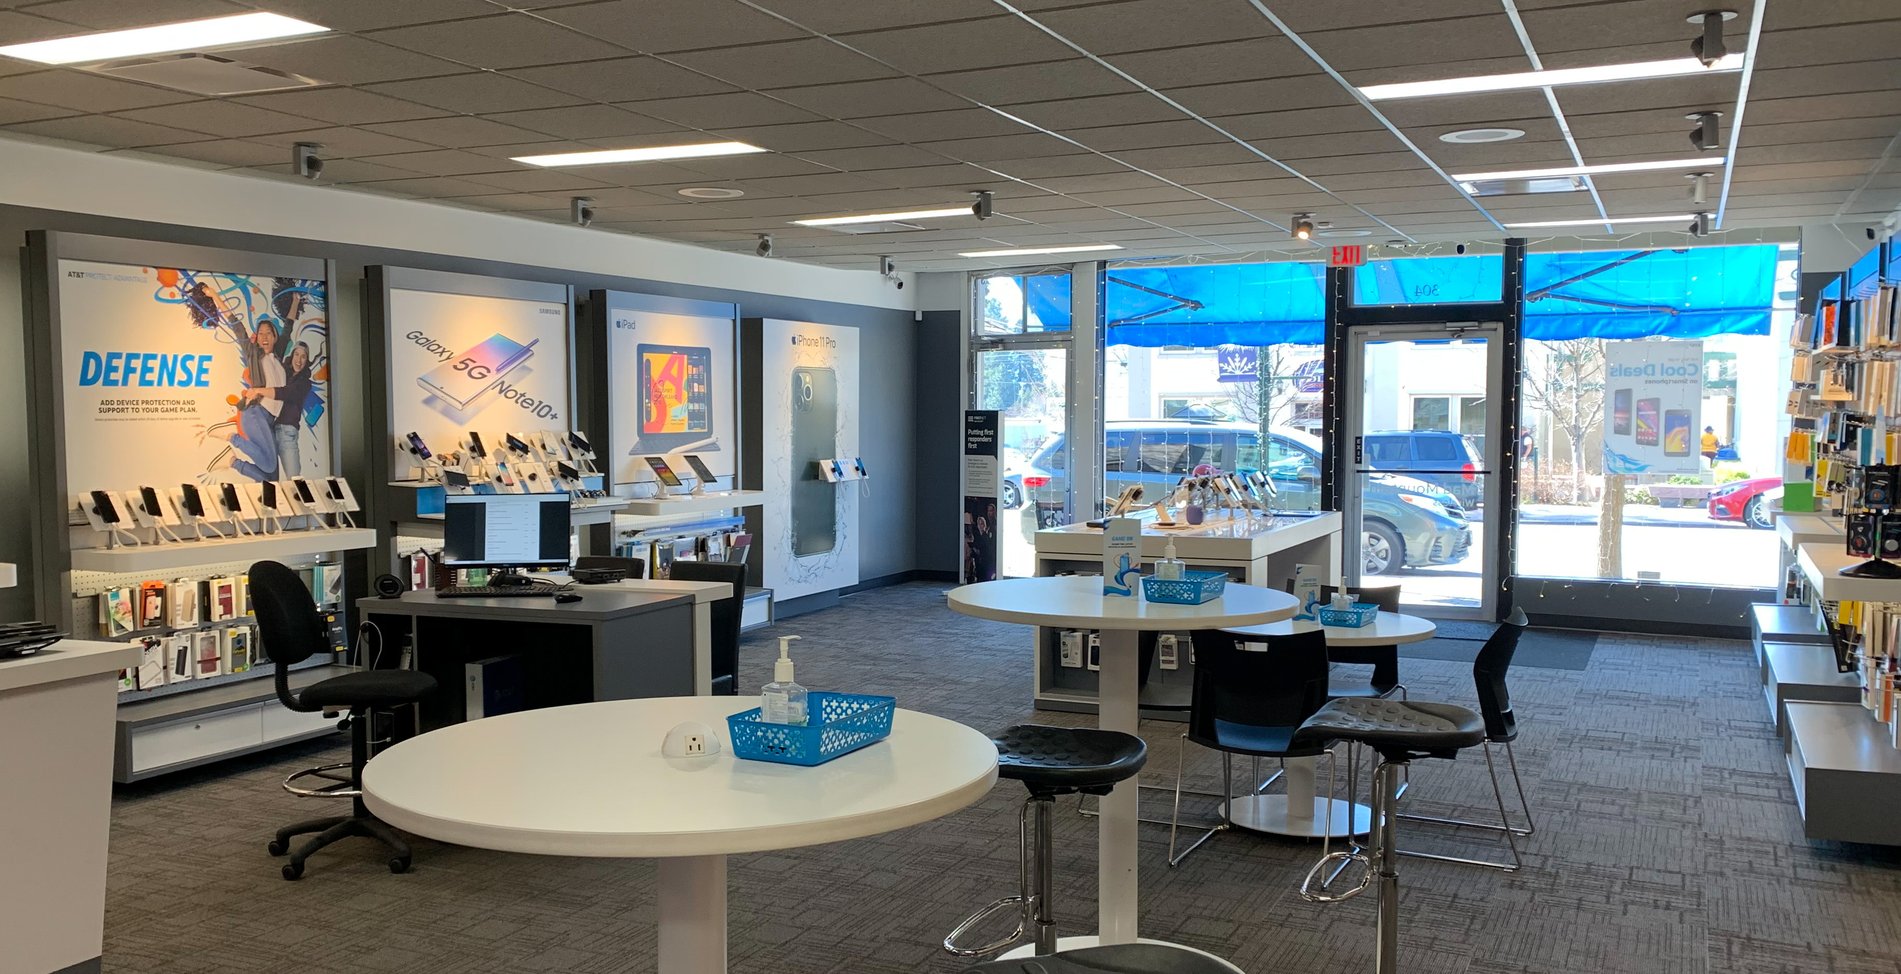 Ordering, activating and educating our customers is our number 1 goal.  We assure that your new phone is operating and functional before you leave our store!